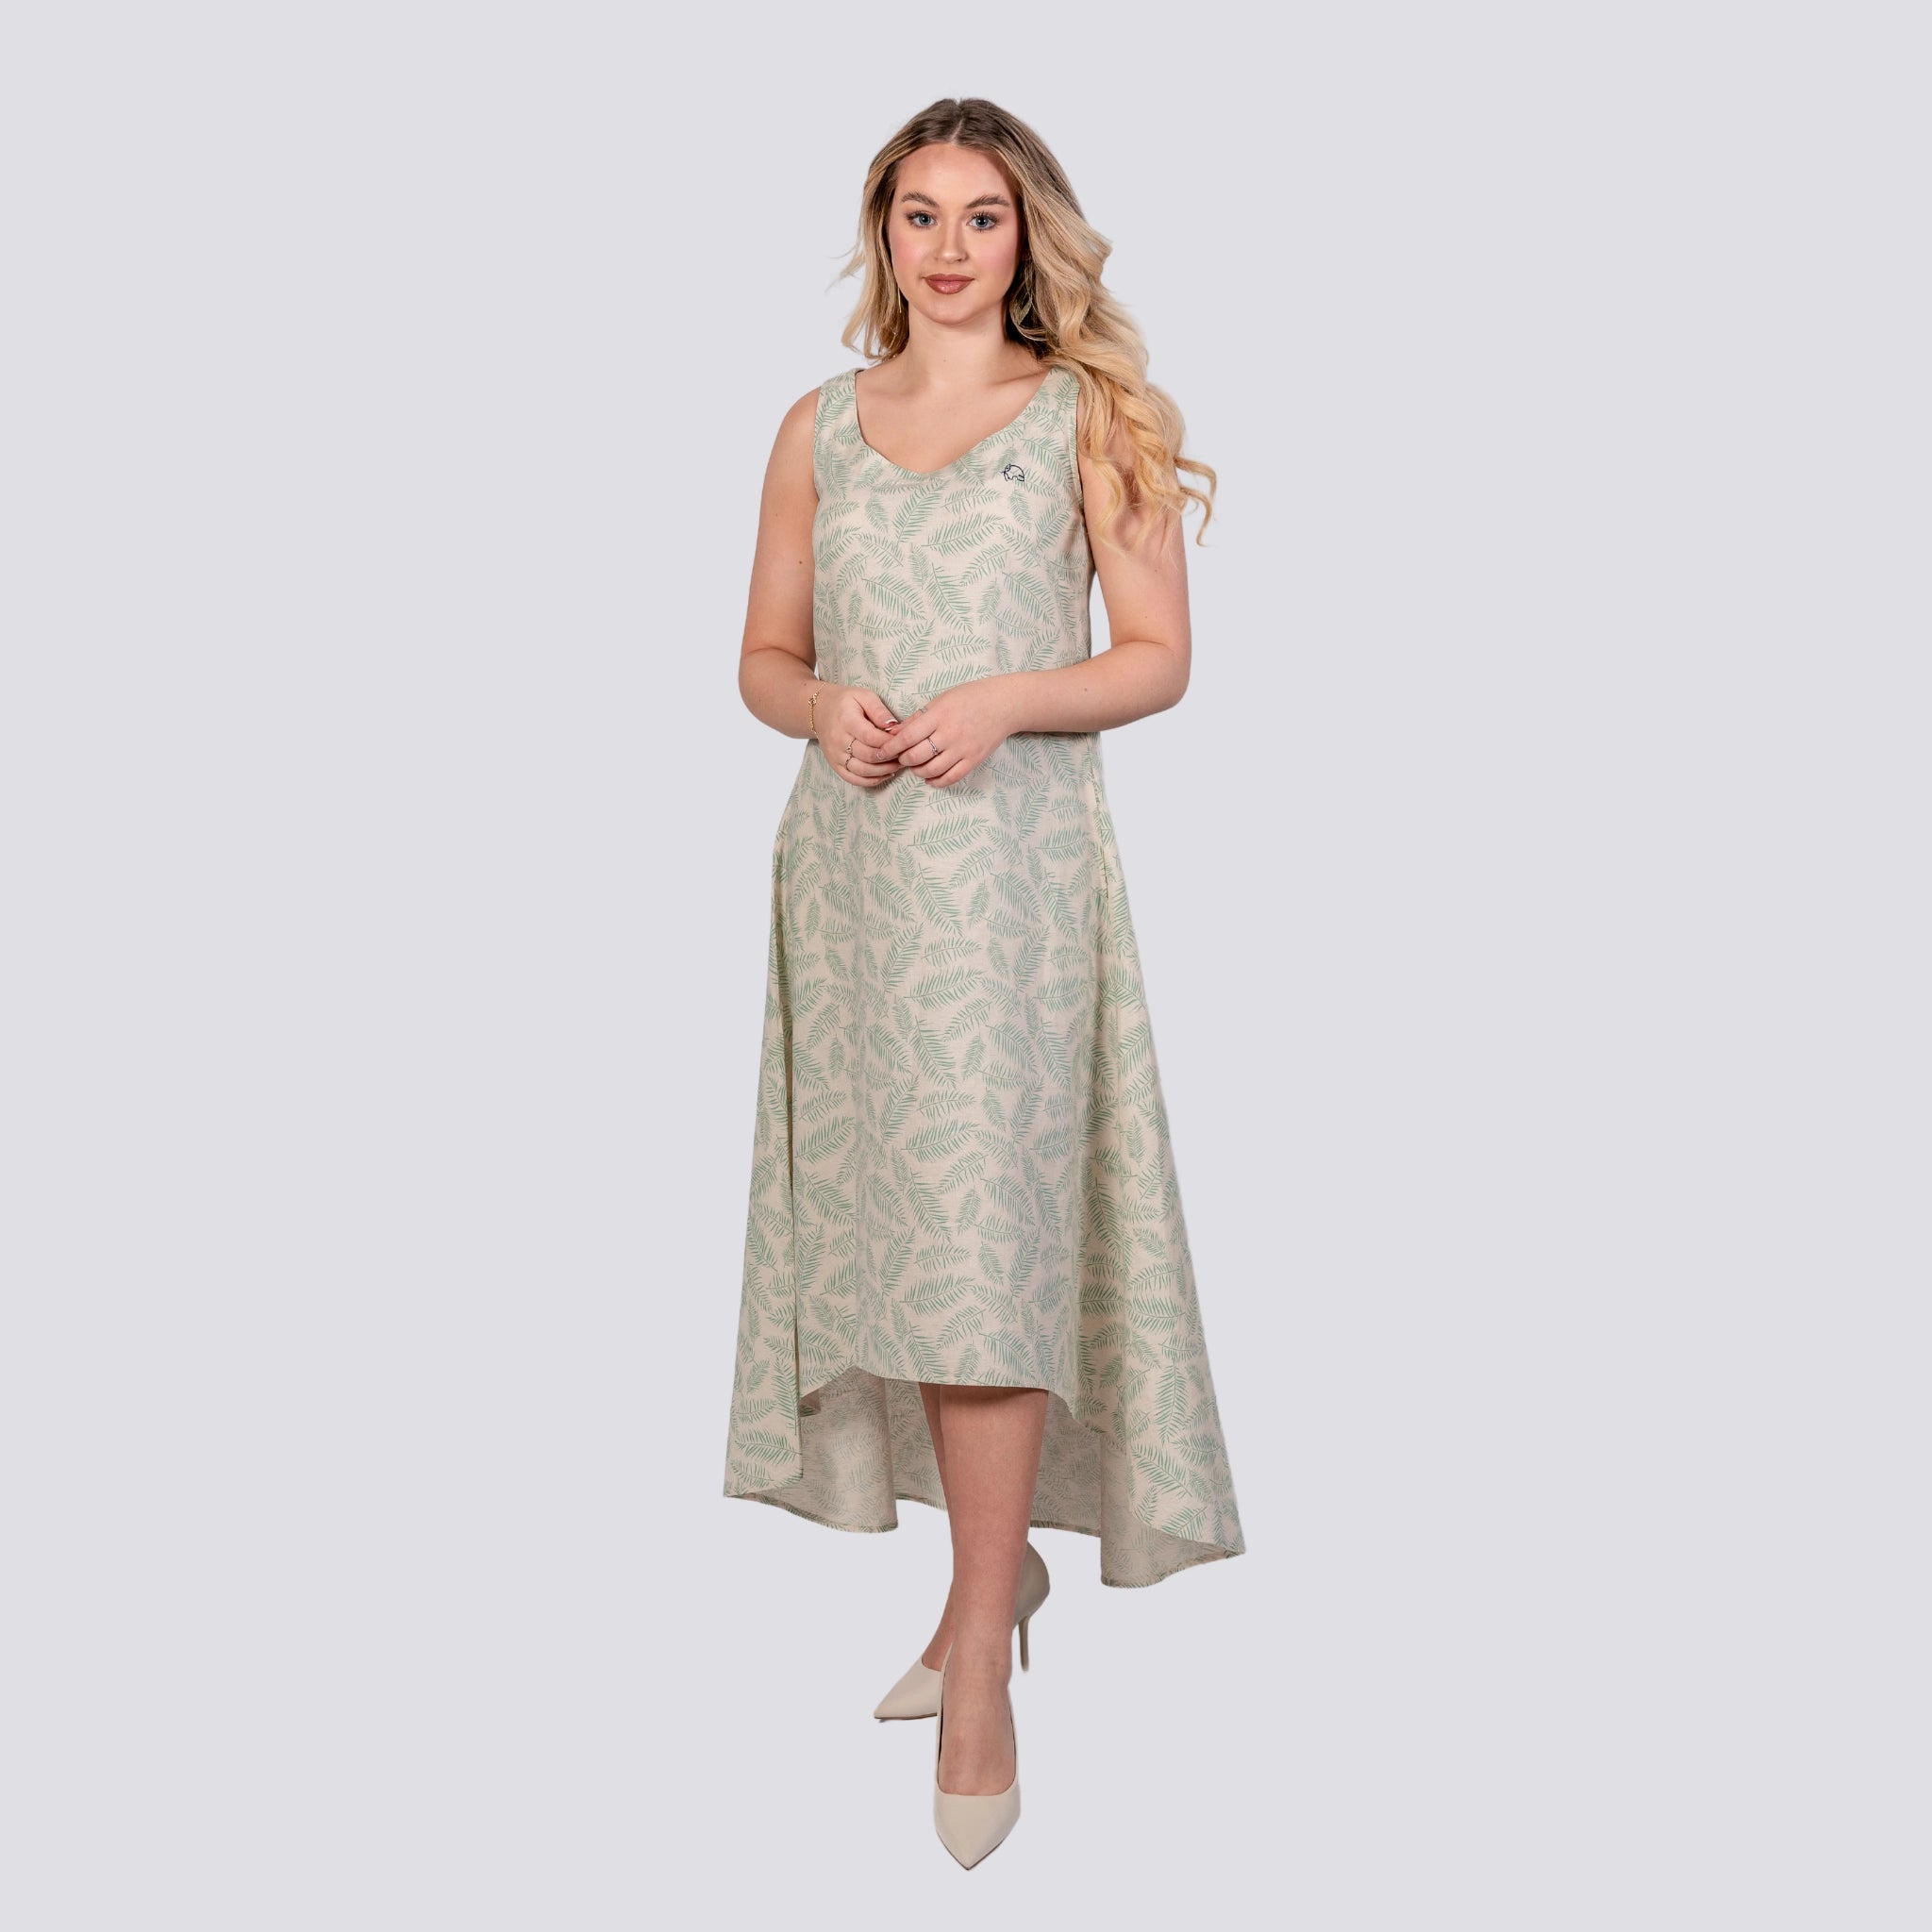 A woman in a Karee Mystic Breeze High Low Linen Cotton Midi Dress stands confidently, her hands clasped in front, wearing white heels against a light gray background.